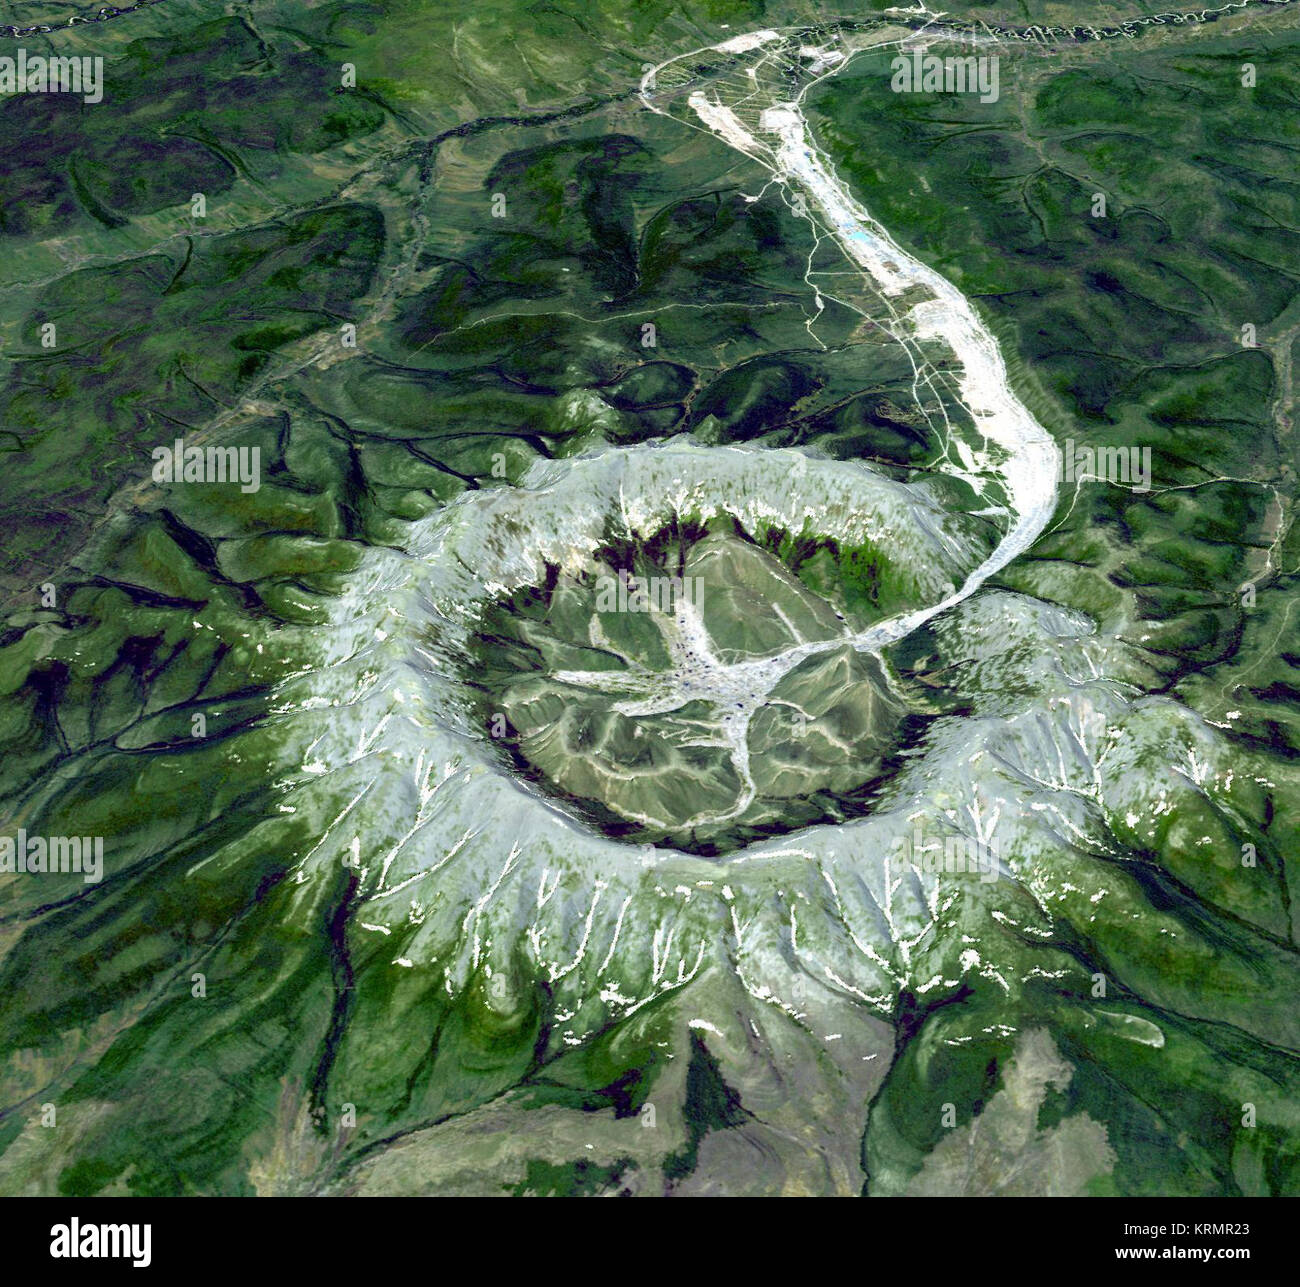 Kondyor Massif, Russia   This is neither an impact crater nor a volcano. It is a perfect circular intrusion, about 10 km in diameter with a topographic ridge up to 600 m high. The Kondyor Massif is located in Eastern Siberia, Russia, north of the city of Khabarovsk. It is a rare form of igneous intrusion called alkaline-ultrabasic massif and it is full of rare minerals. The river flowing out of it forms placer mineral deposits. Last year 4 tons of platinum were mined there. A remarkable and very unusual mineralogical feature of the deposit is the presence of coarse crystals of Pt-Fe alloy, coa Stock Photo